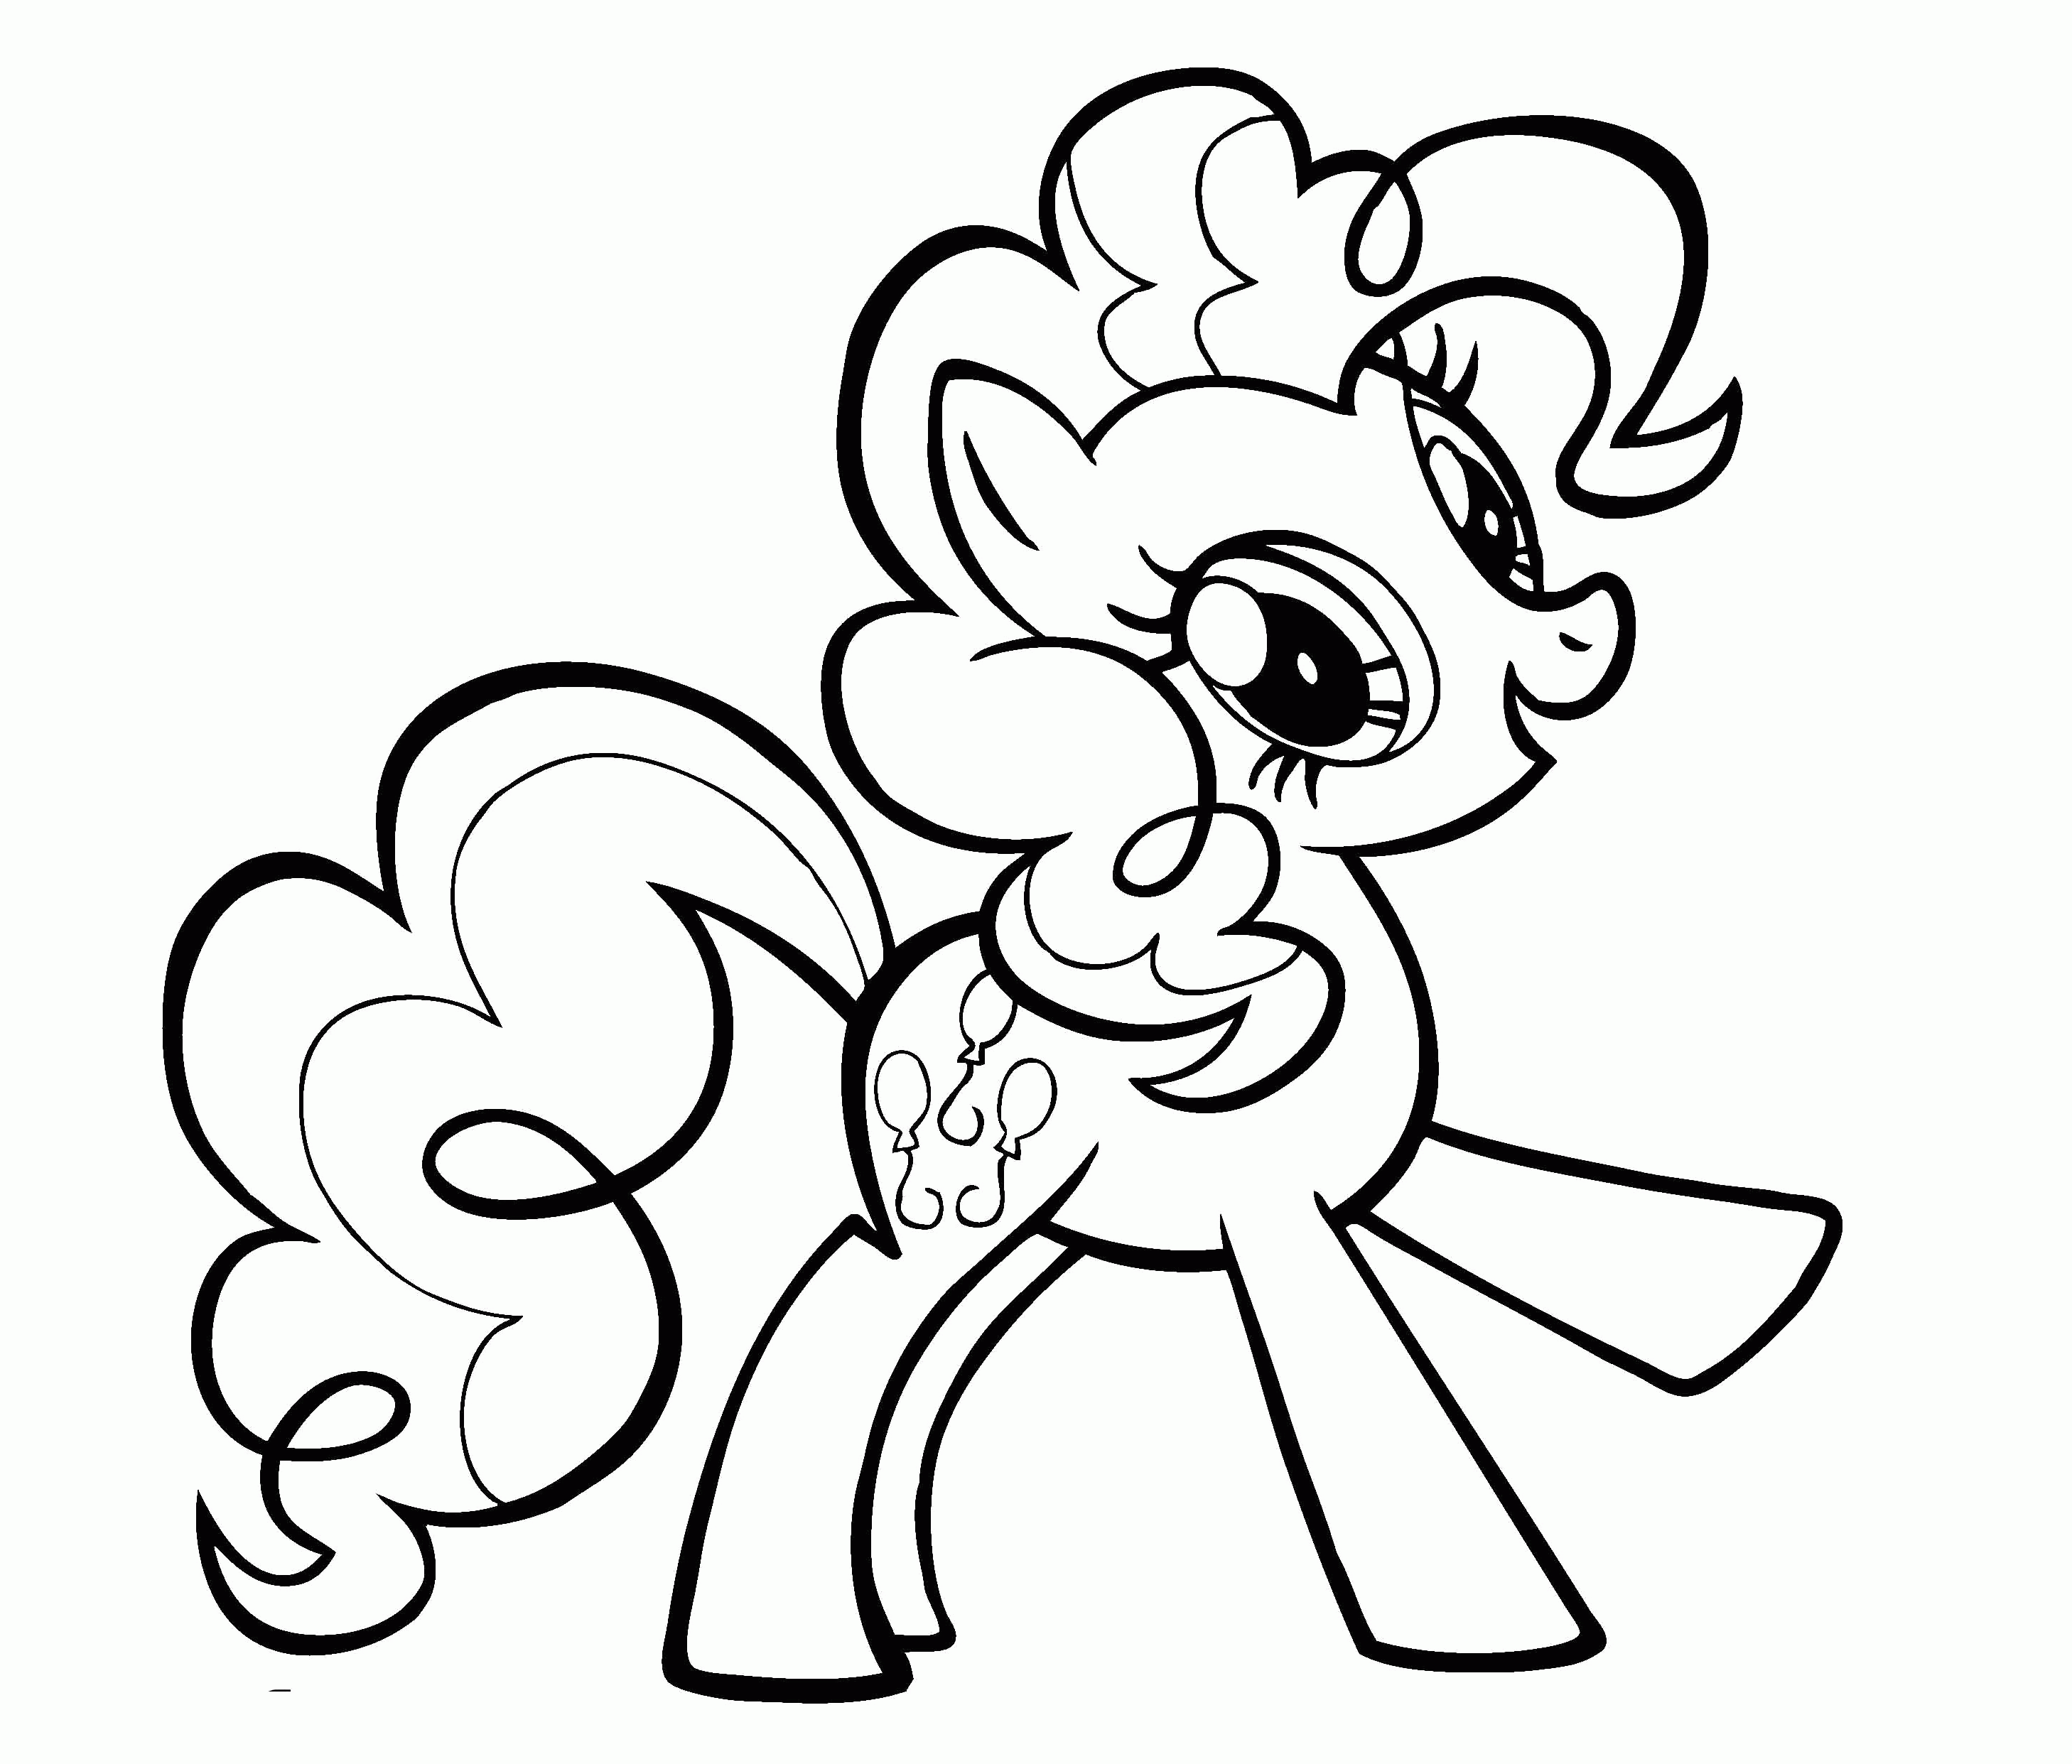 Pinkie Pie Coloring | Coloring Pages for Kids and for Adults